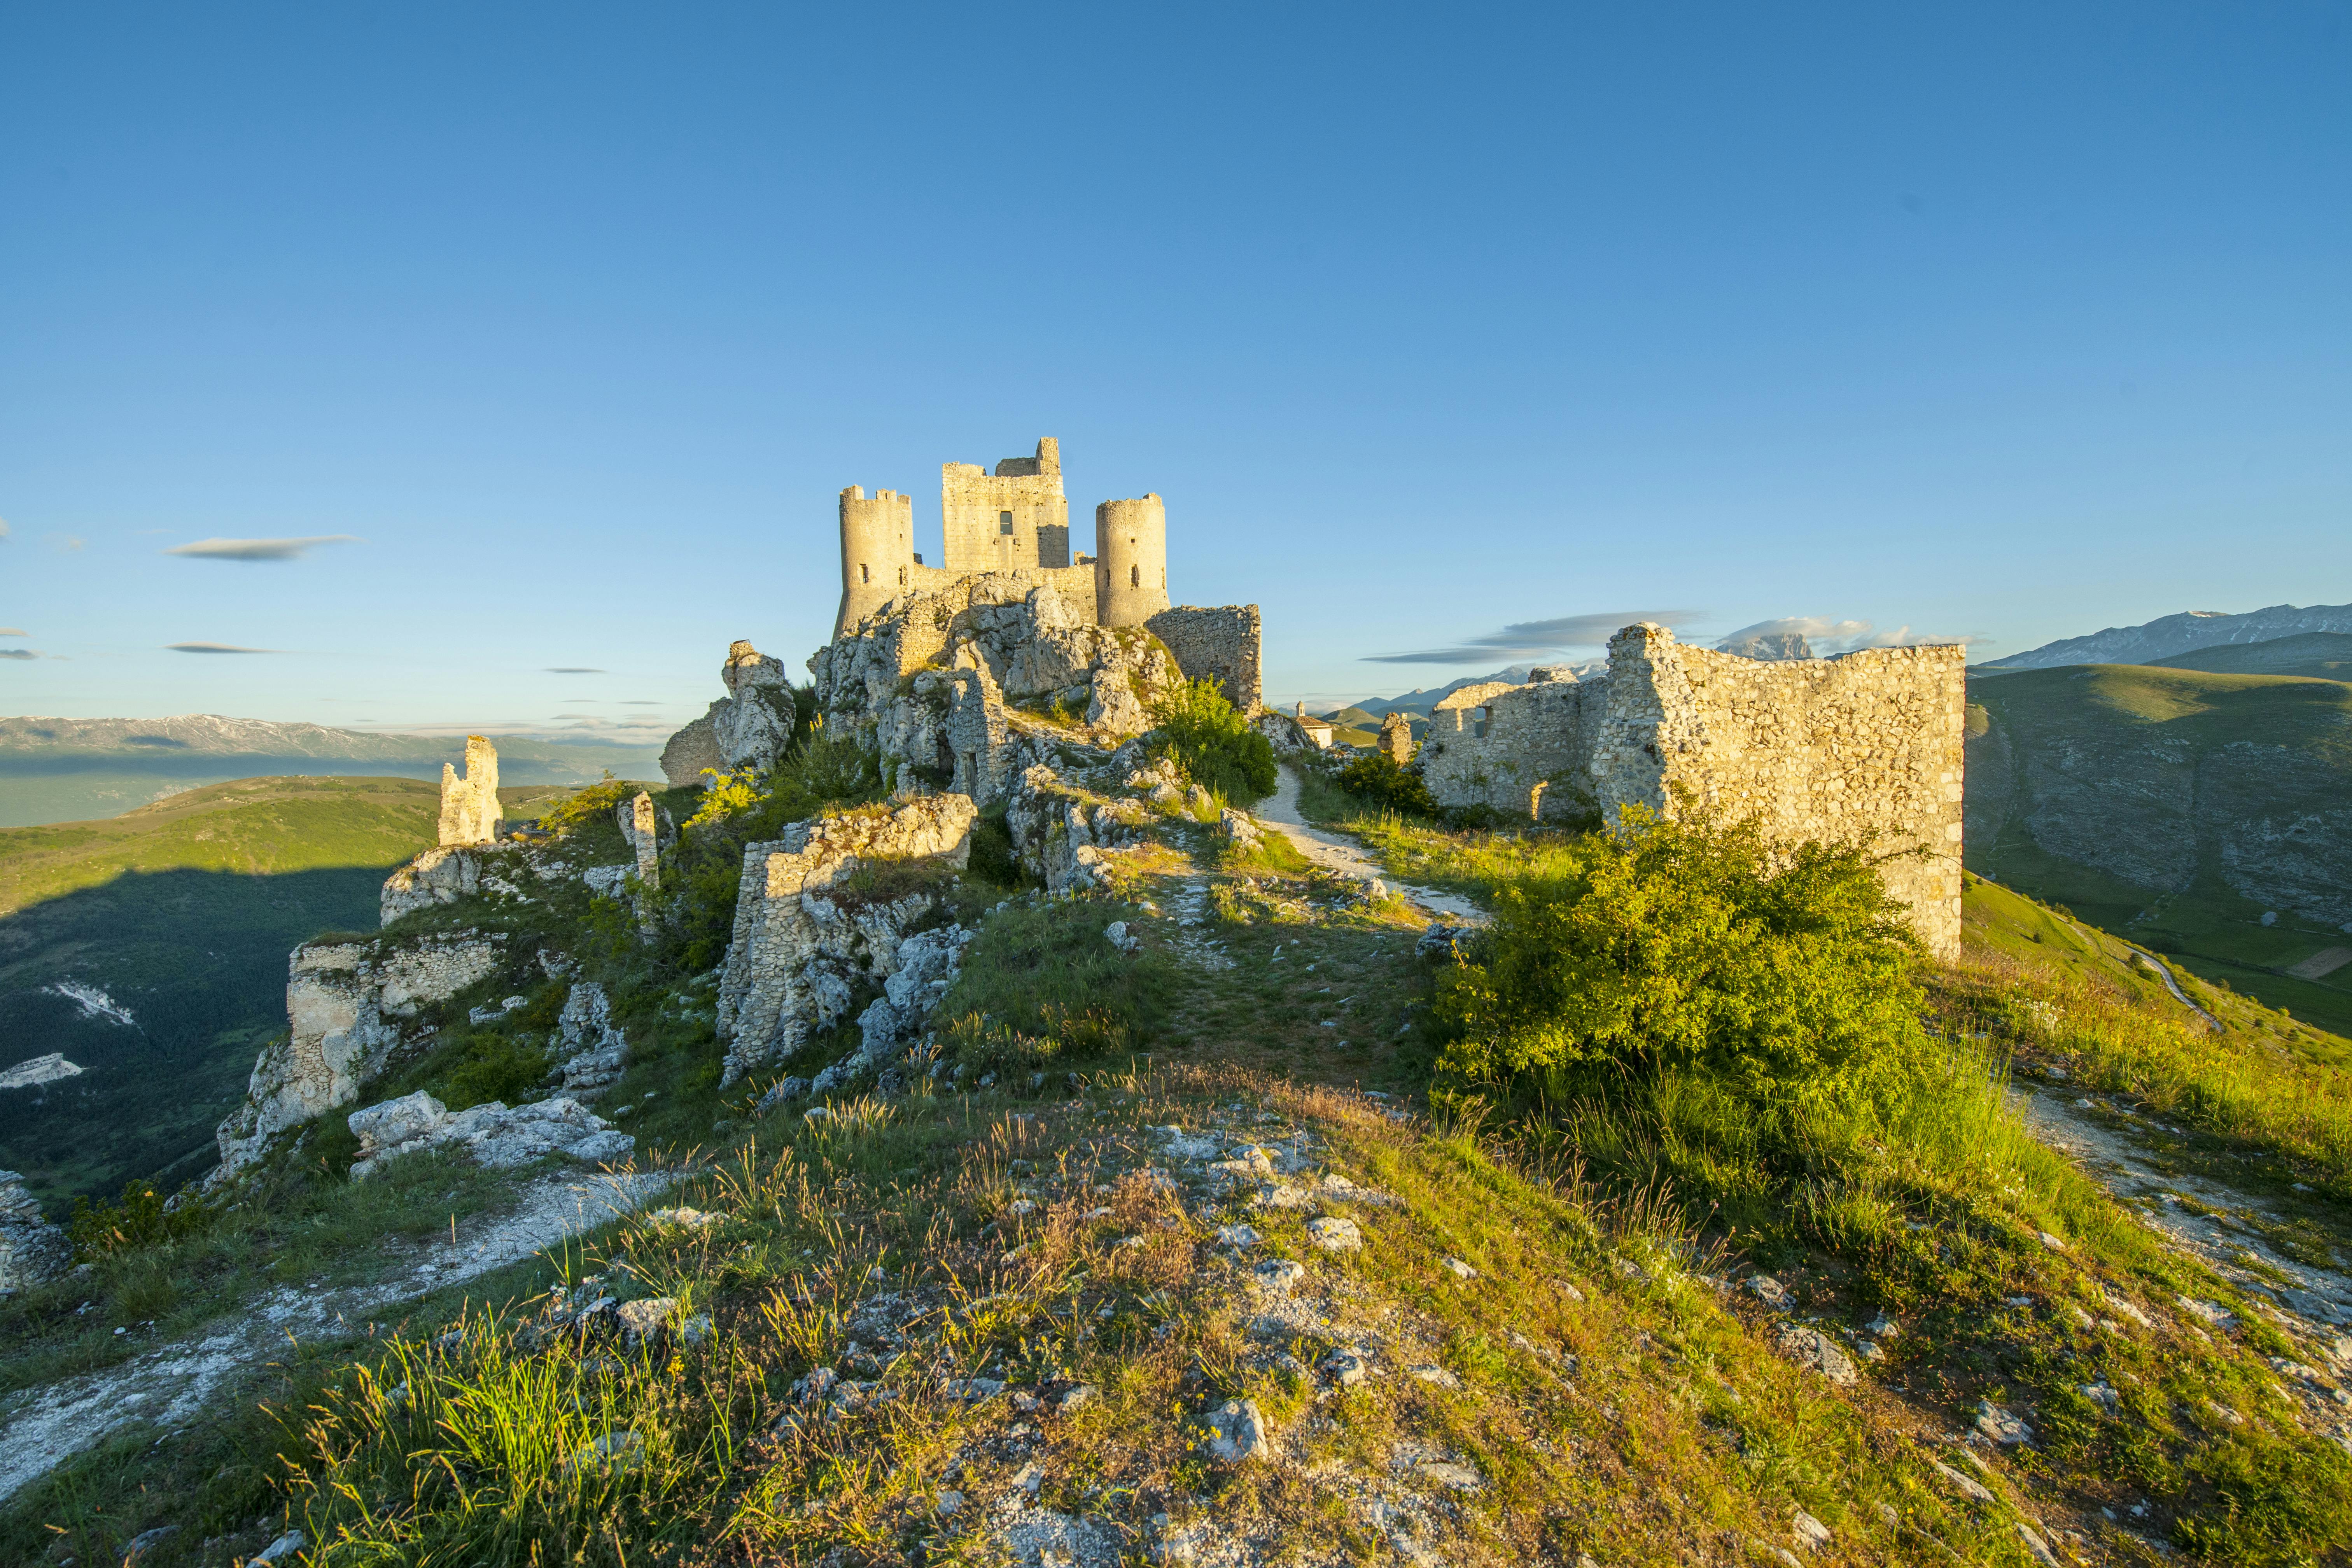 Discover medieval wonders in the mountains of Abruzzo